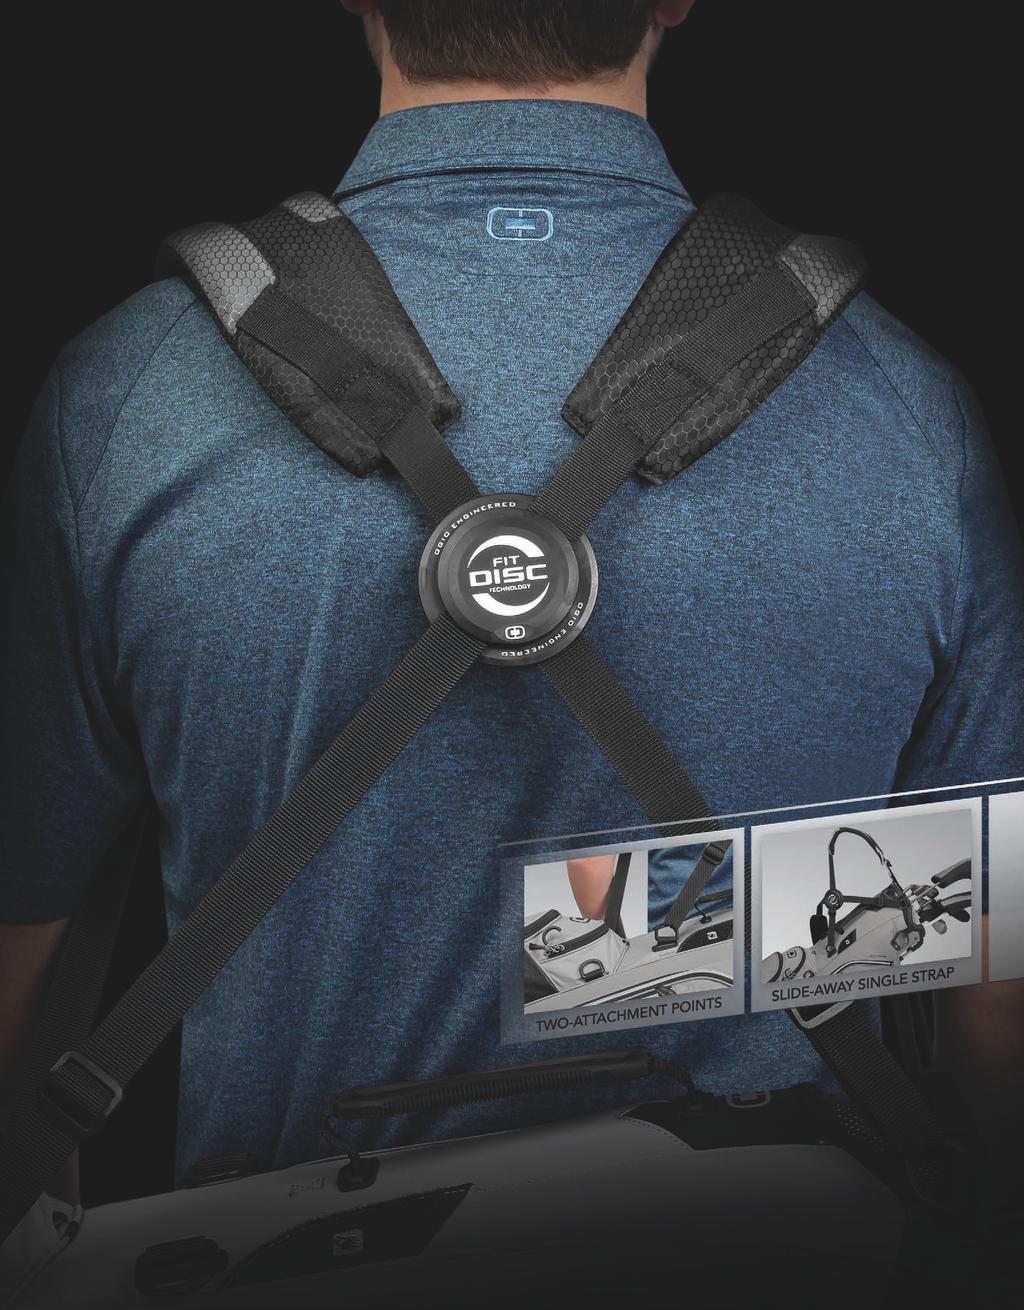 FIT DISC TECHNOLOGY STRAP SYSTEM At the center of OGIO s new Fit Disc Strap System is a unique custom designed dual molded technology that conjoins the straps but allows complete and free independent